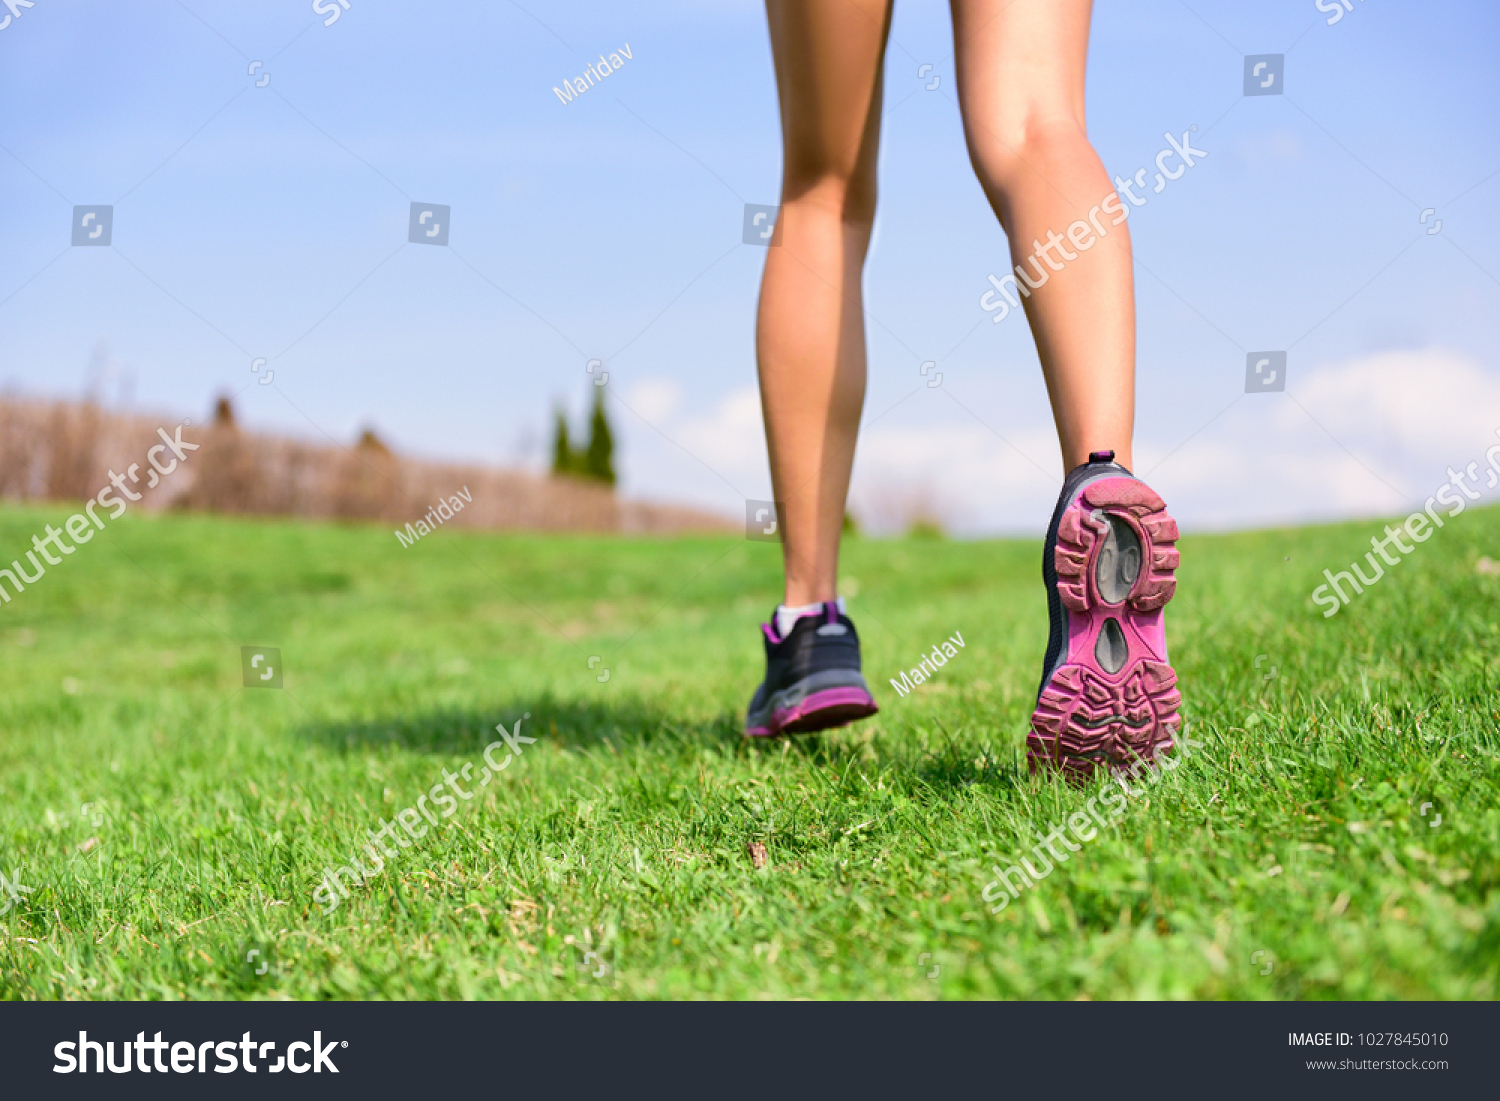 running on grass shoes